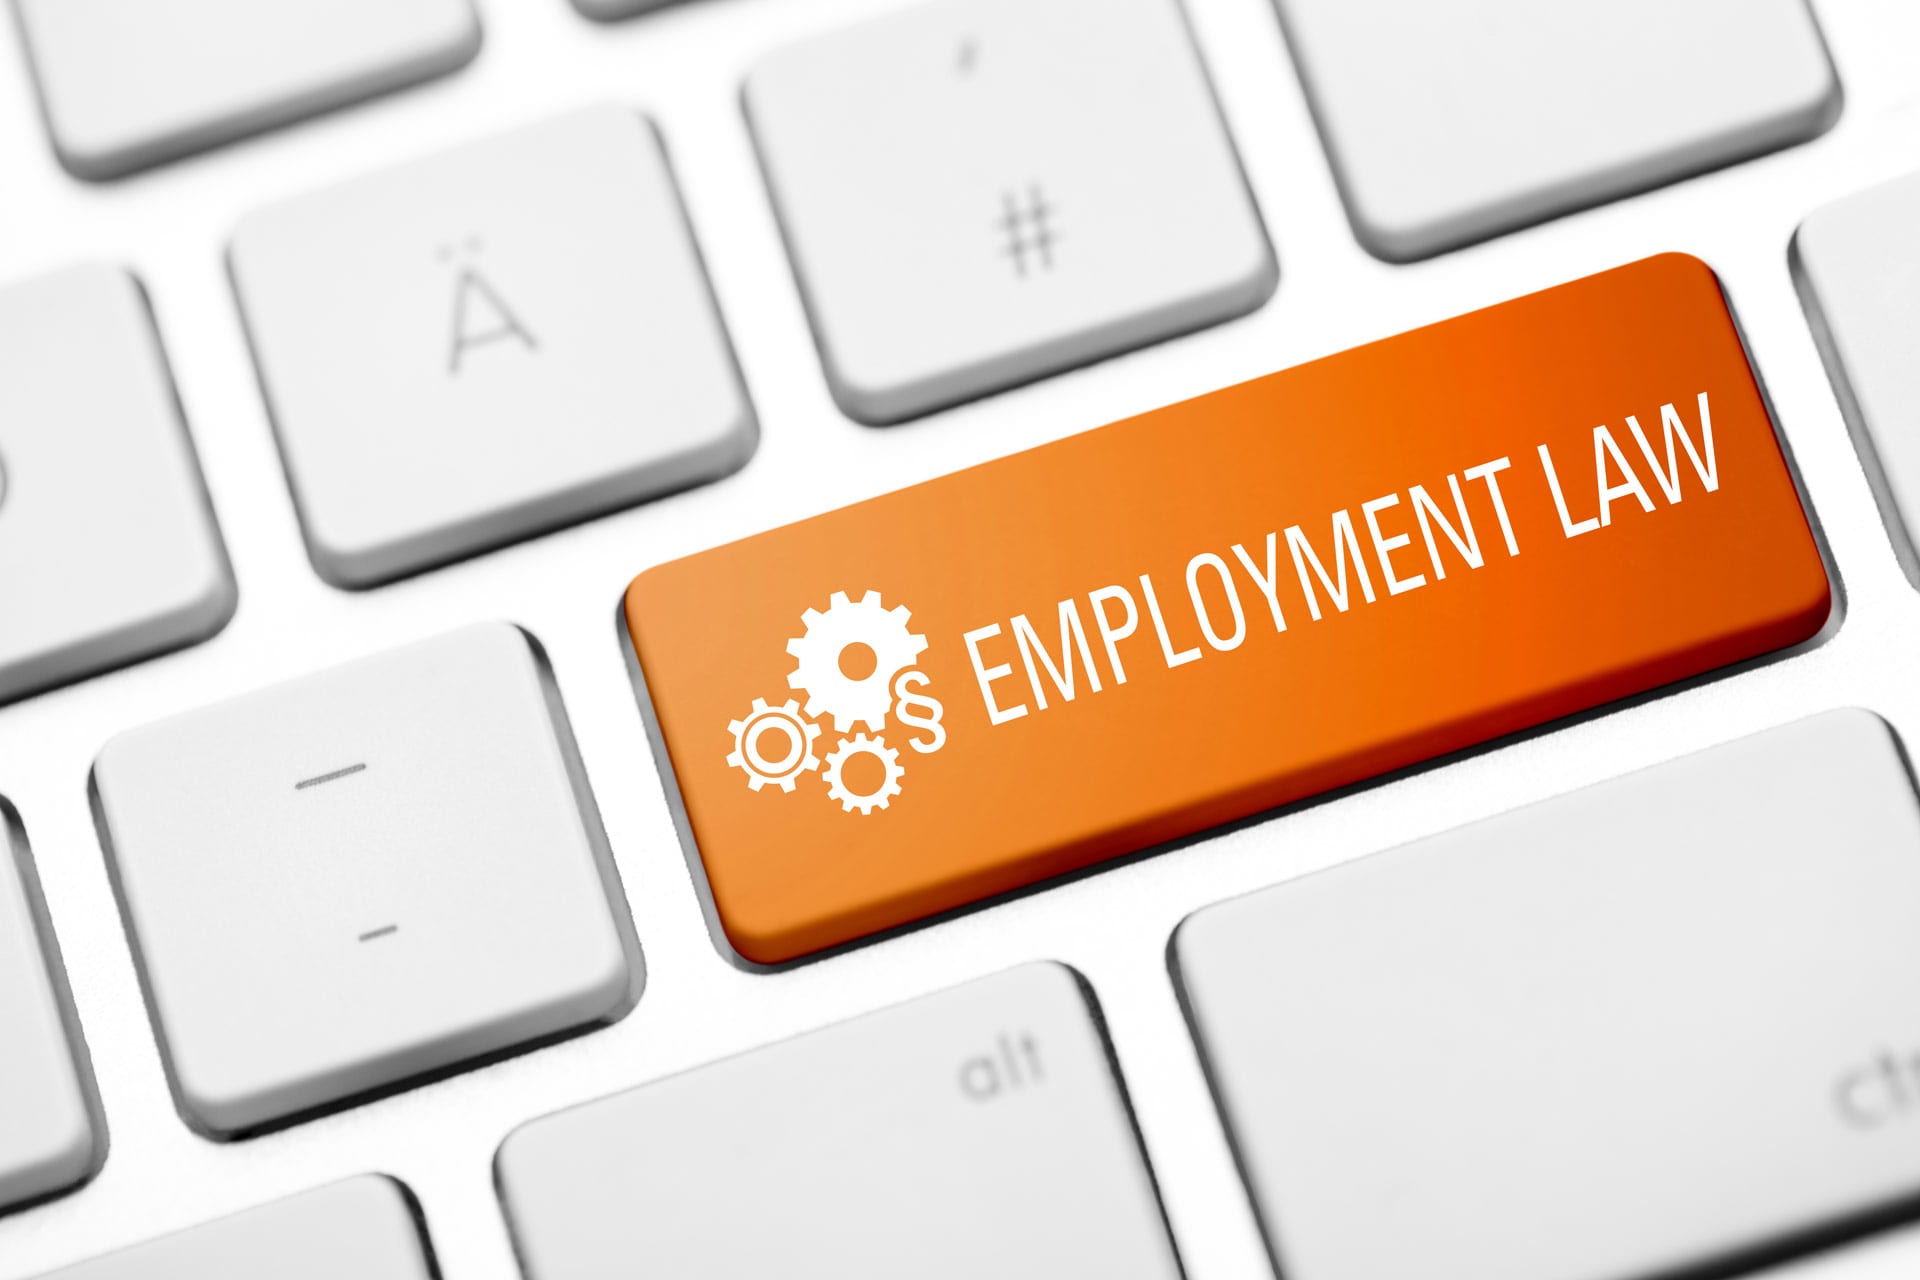 A Summary of recent Employment Law change Collins & May Law